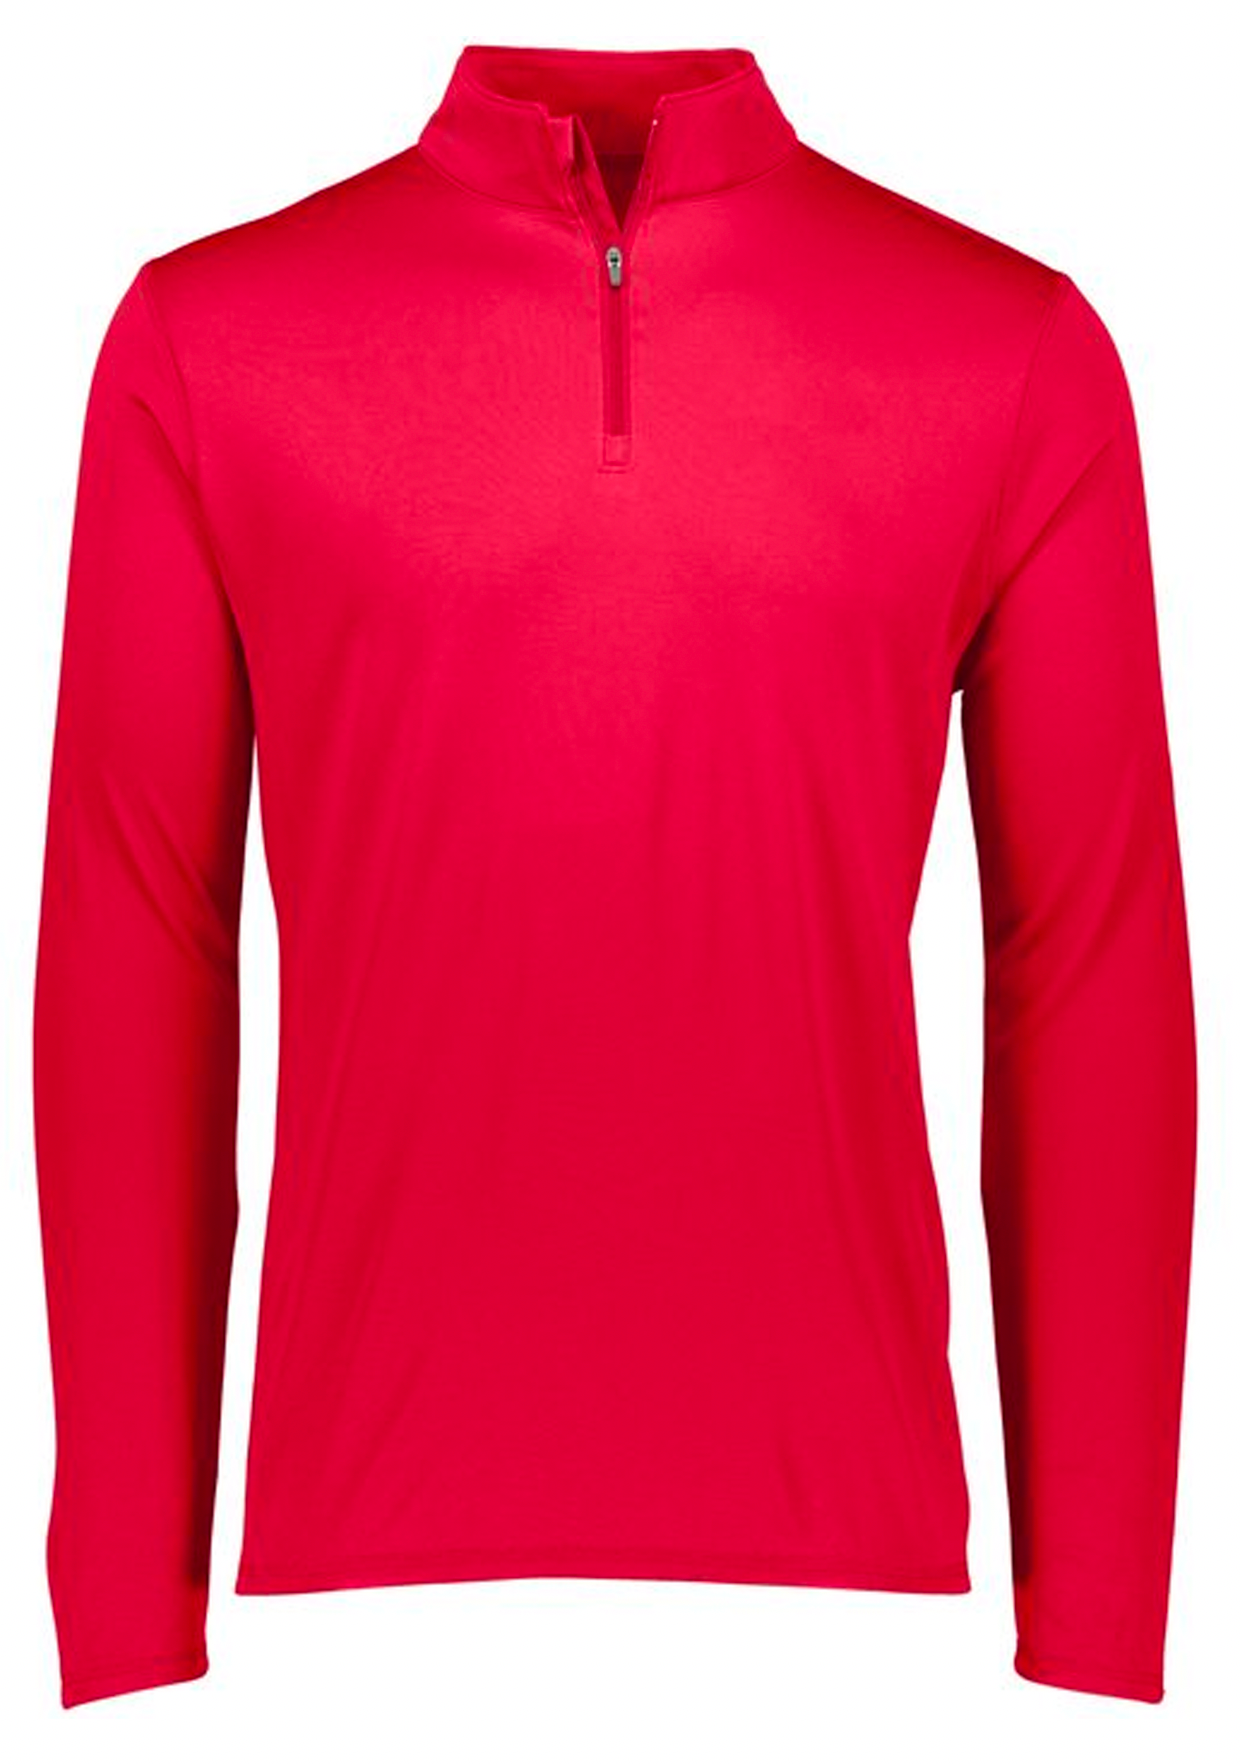 OhioRise - Integrated Services 1/4 Zip Pullover